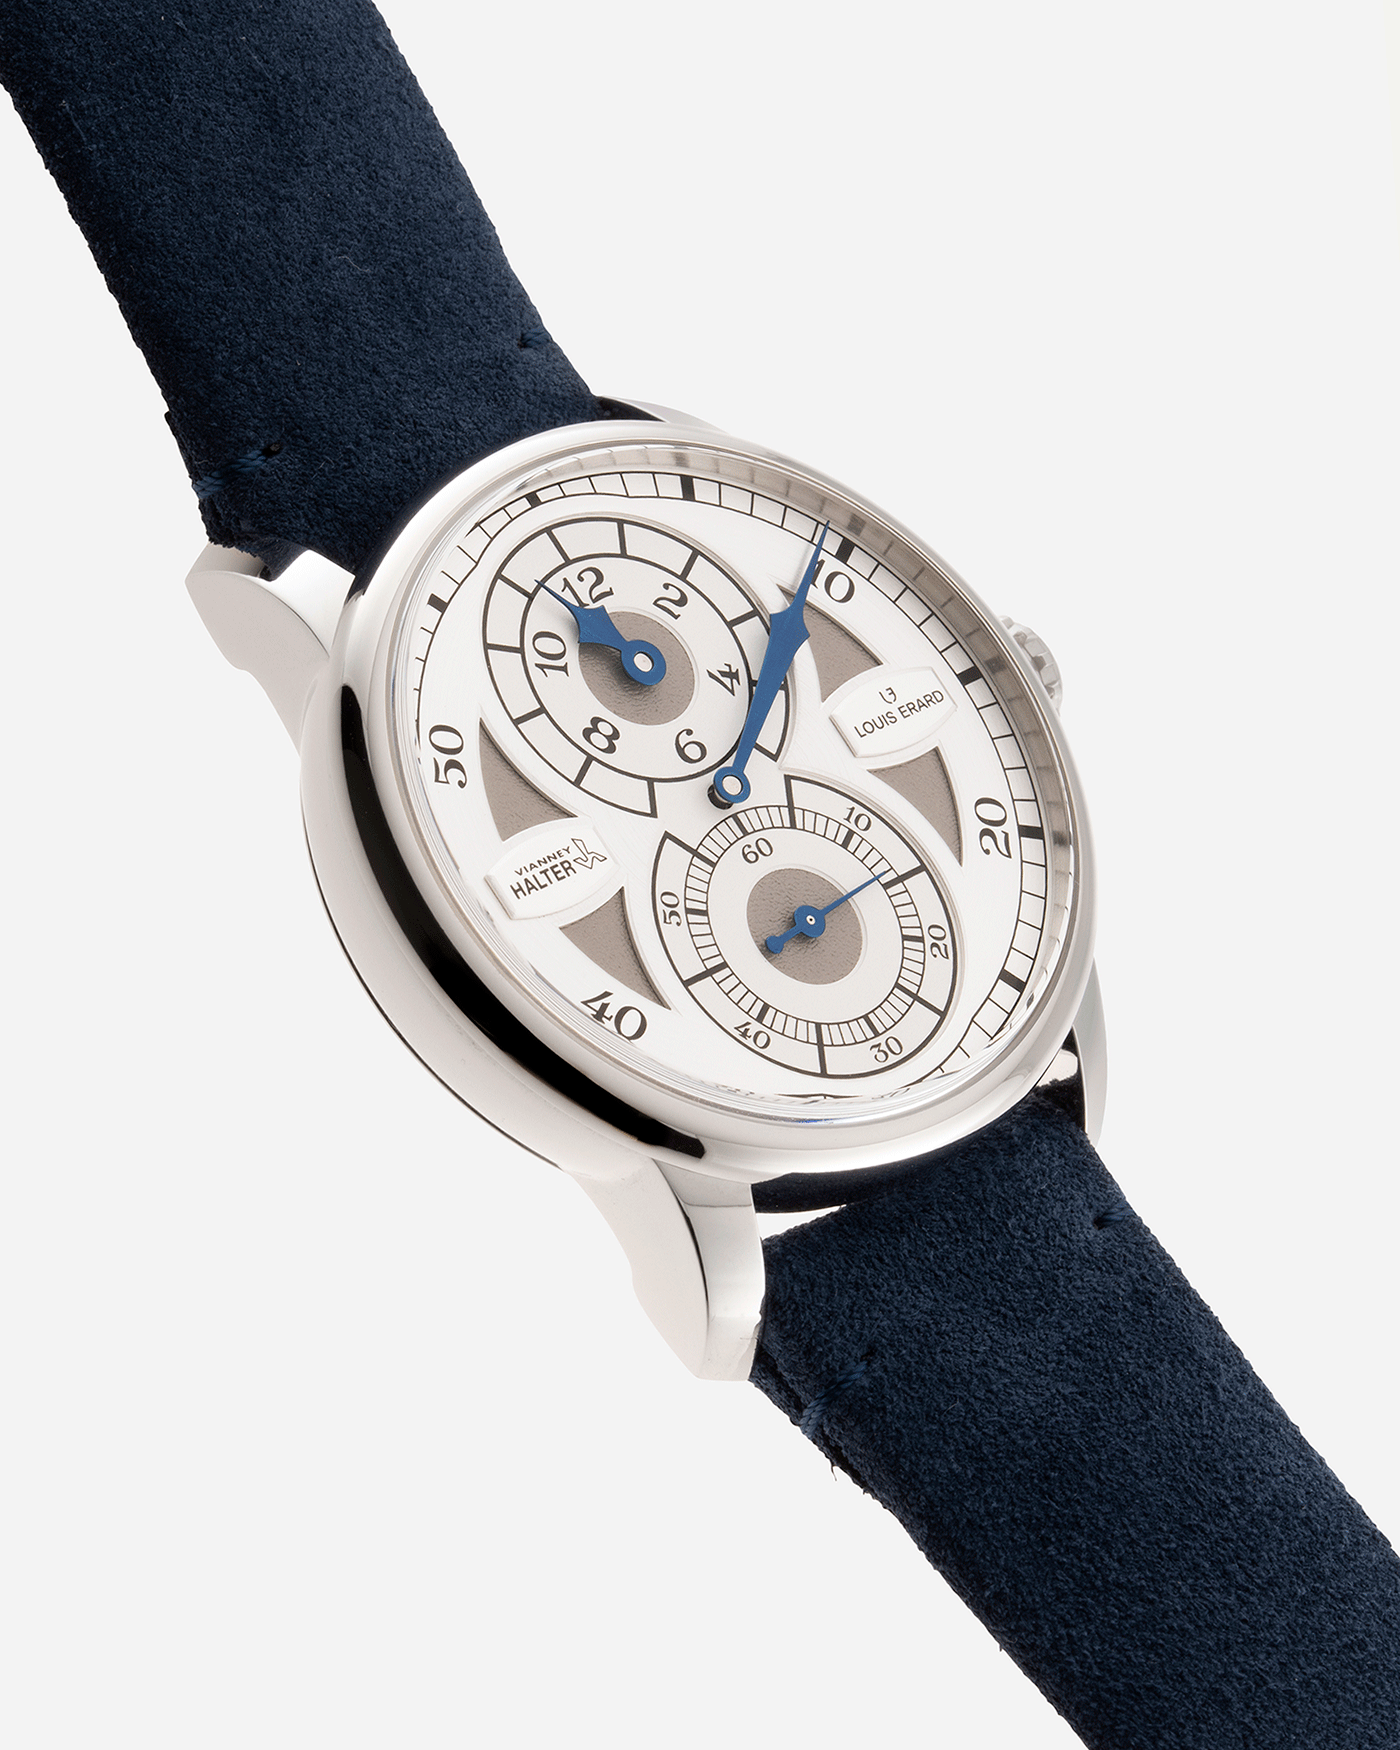 Brand: Louis Erard X Vianney Halter Year: 2020 Model: Le Regulateur Material: Stainless Steel Movement: Selitta Based Self Winding Movement Case Diameter: 42mm Bracelet/Strap: Louis Erard Blue Suede Strap with Stainless Steel Tang Buckle